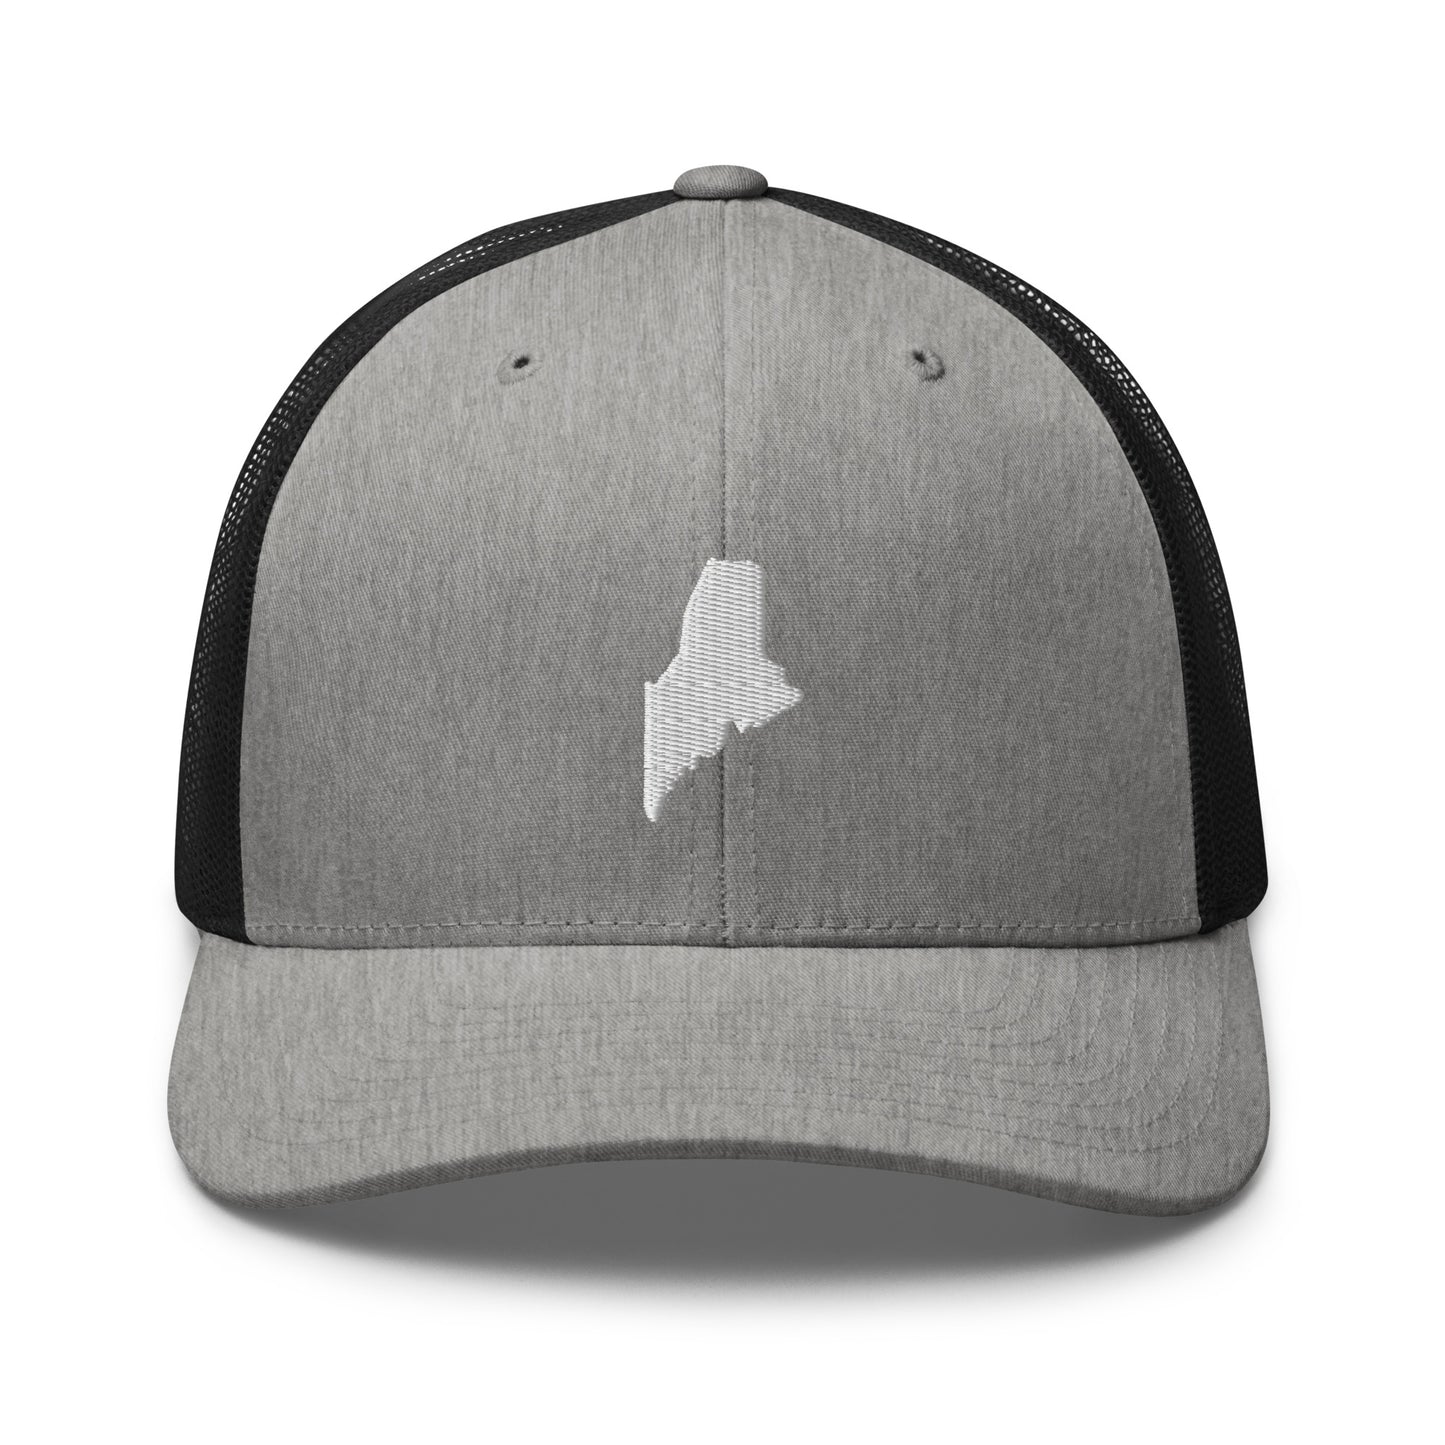 Maine State Silhouette Mid 6 Panel Snapback Trucker Hat